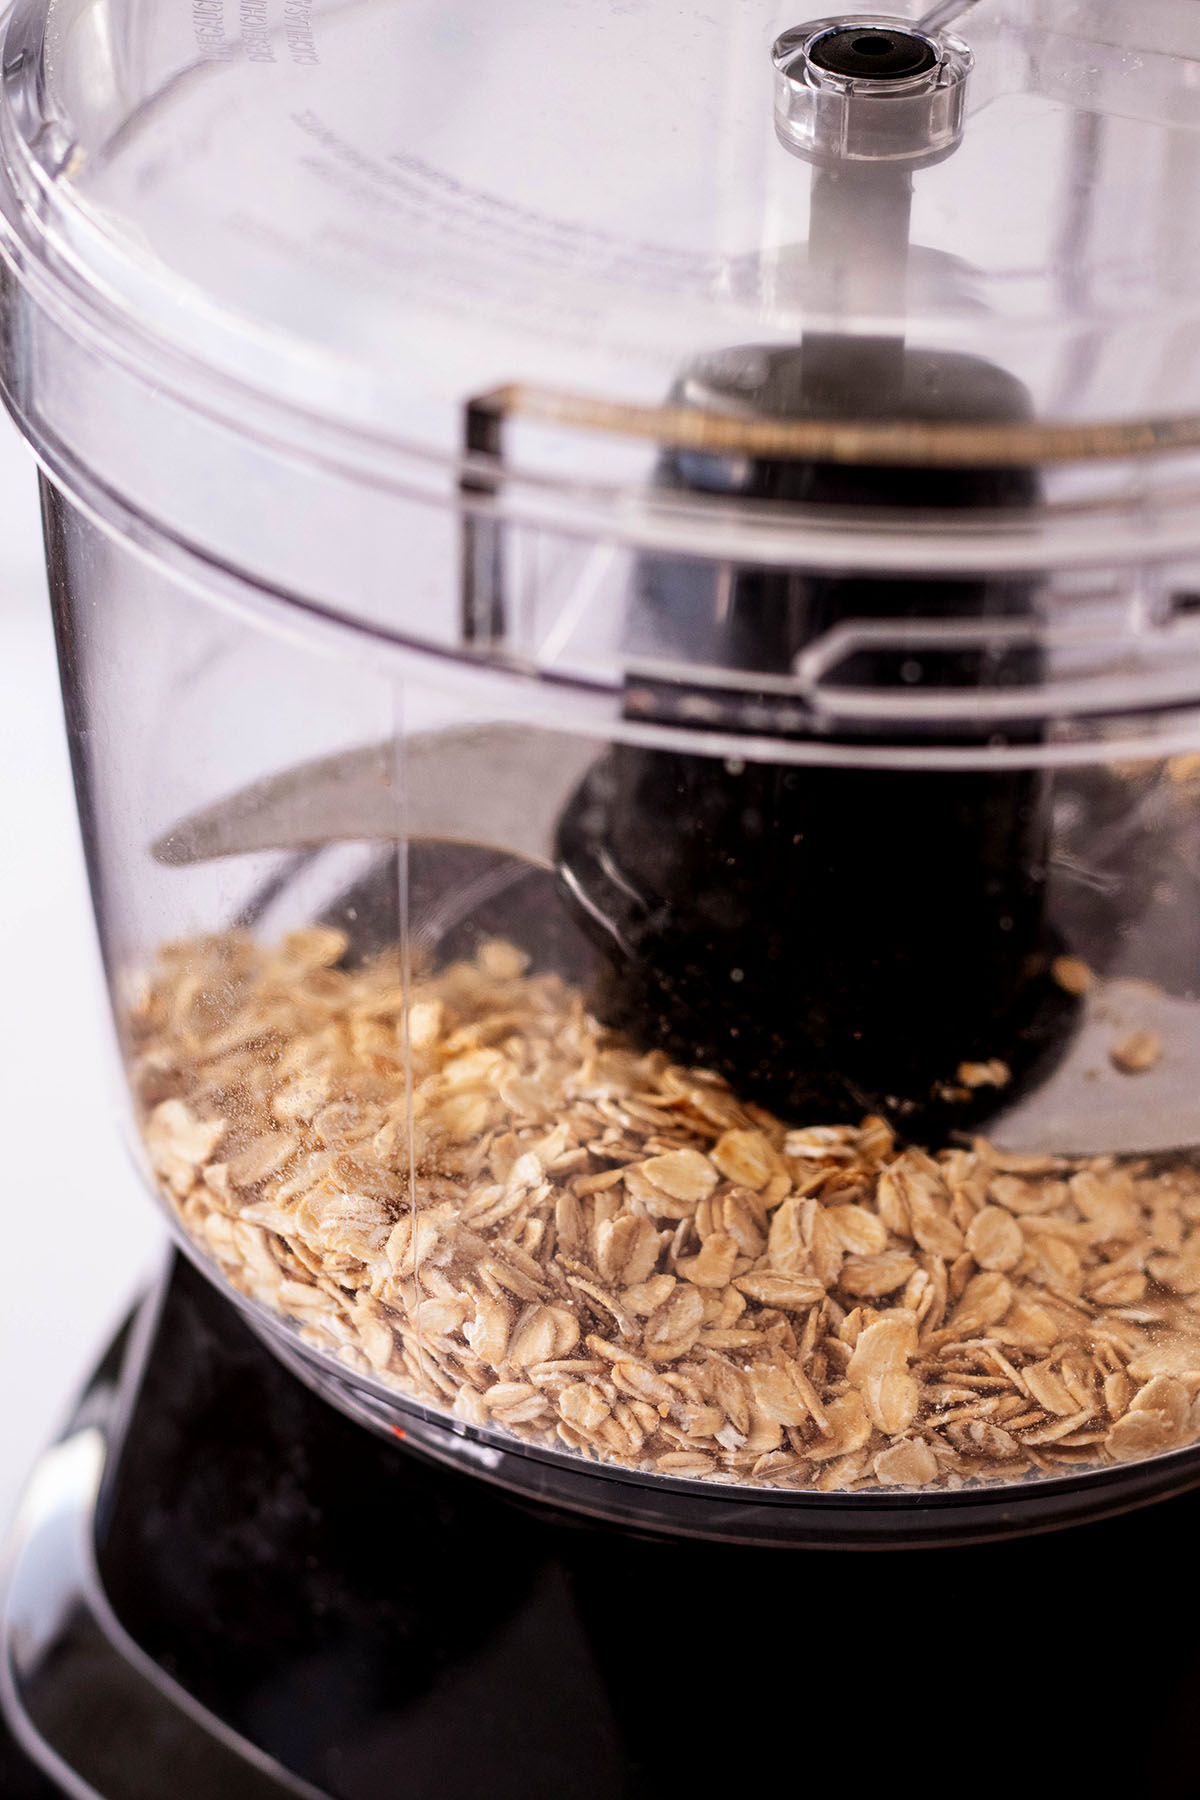 Rolled oats in a food processor.